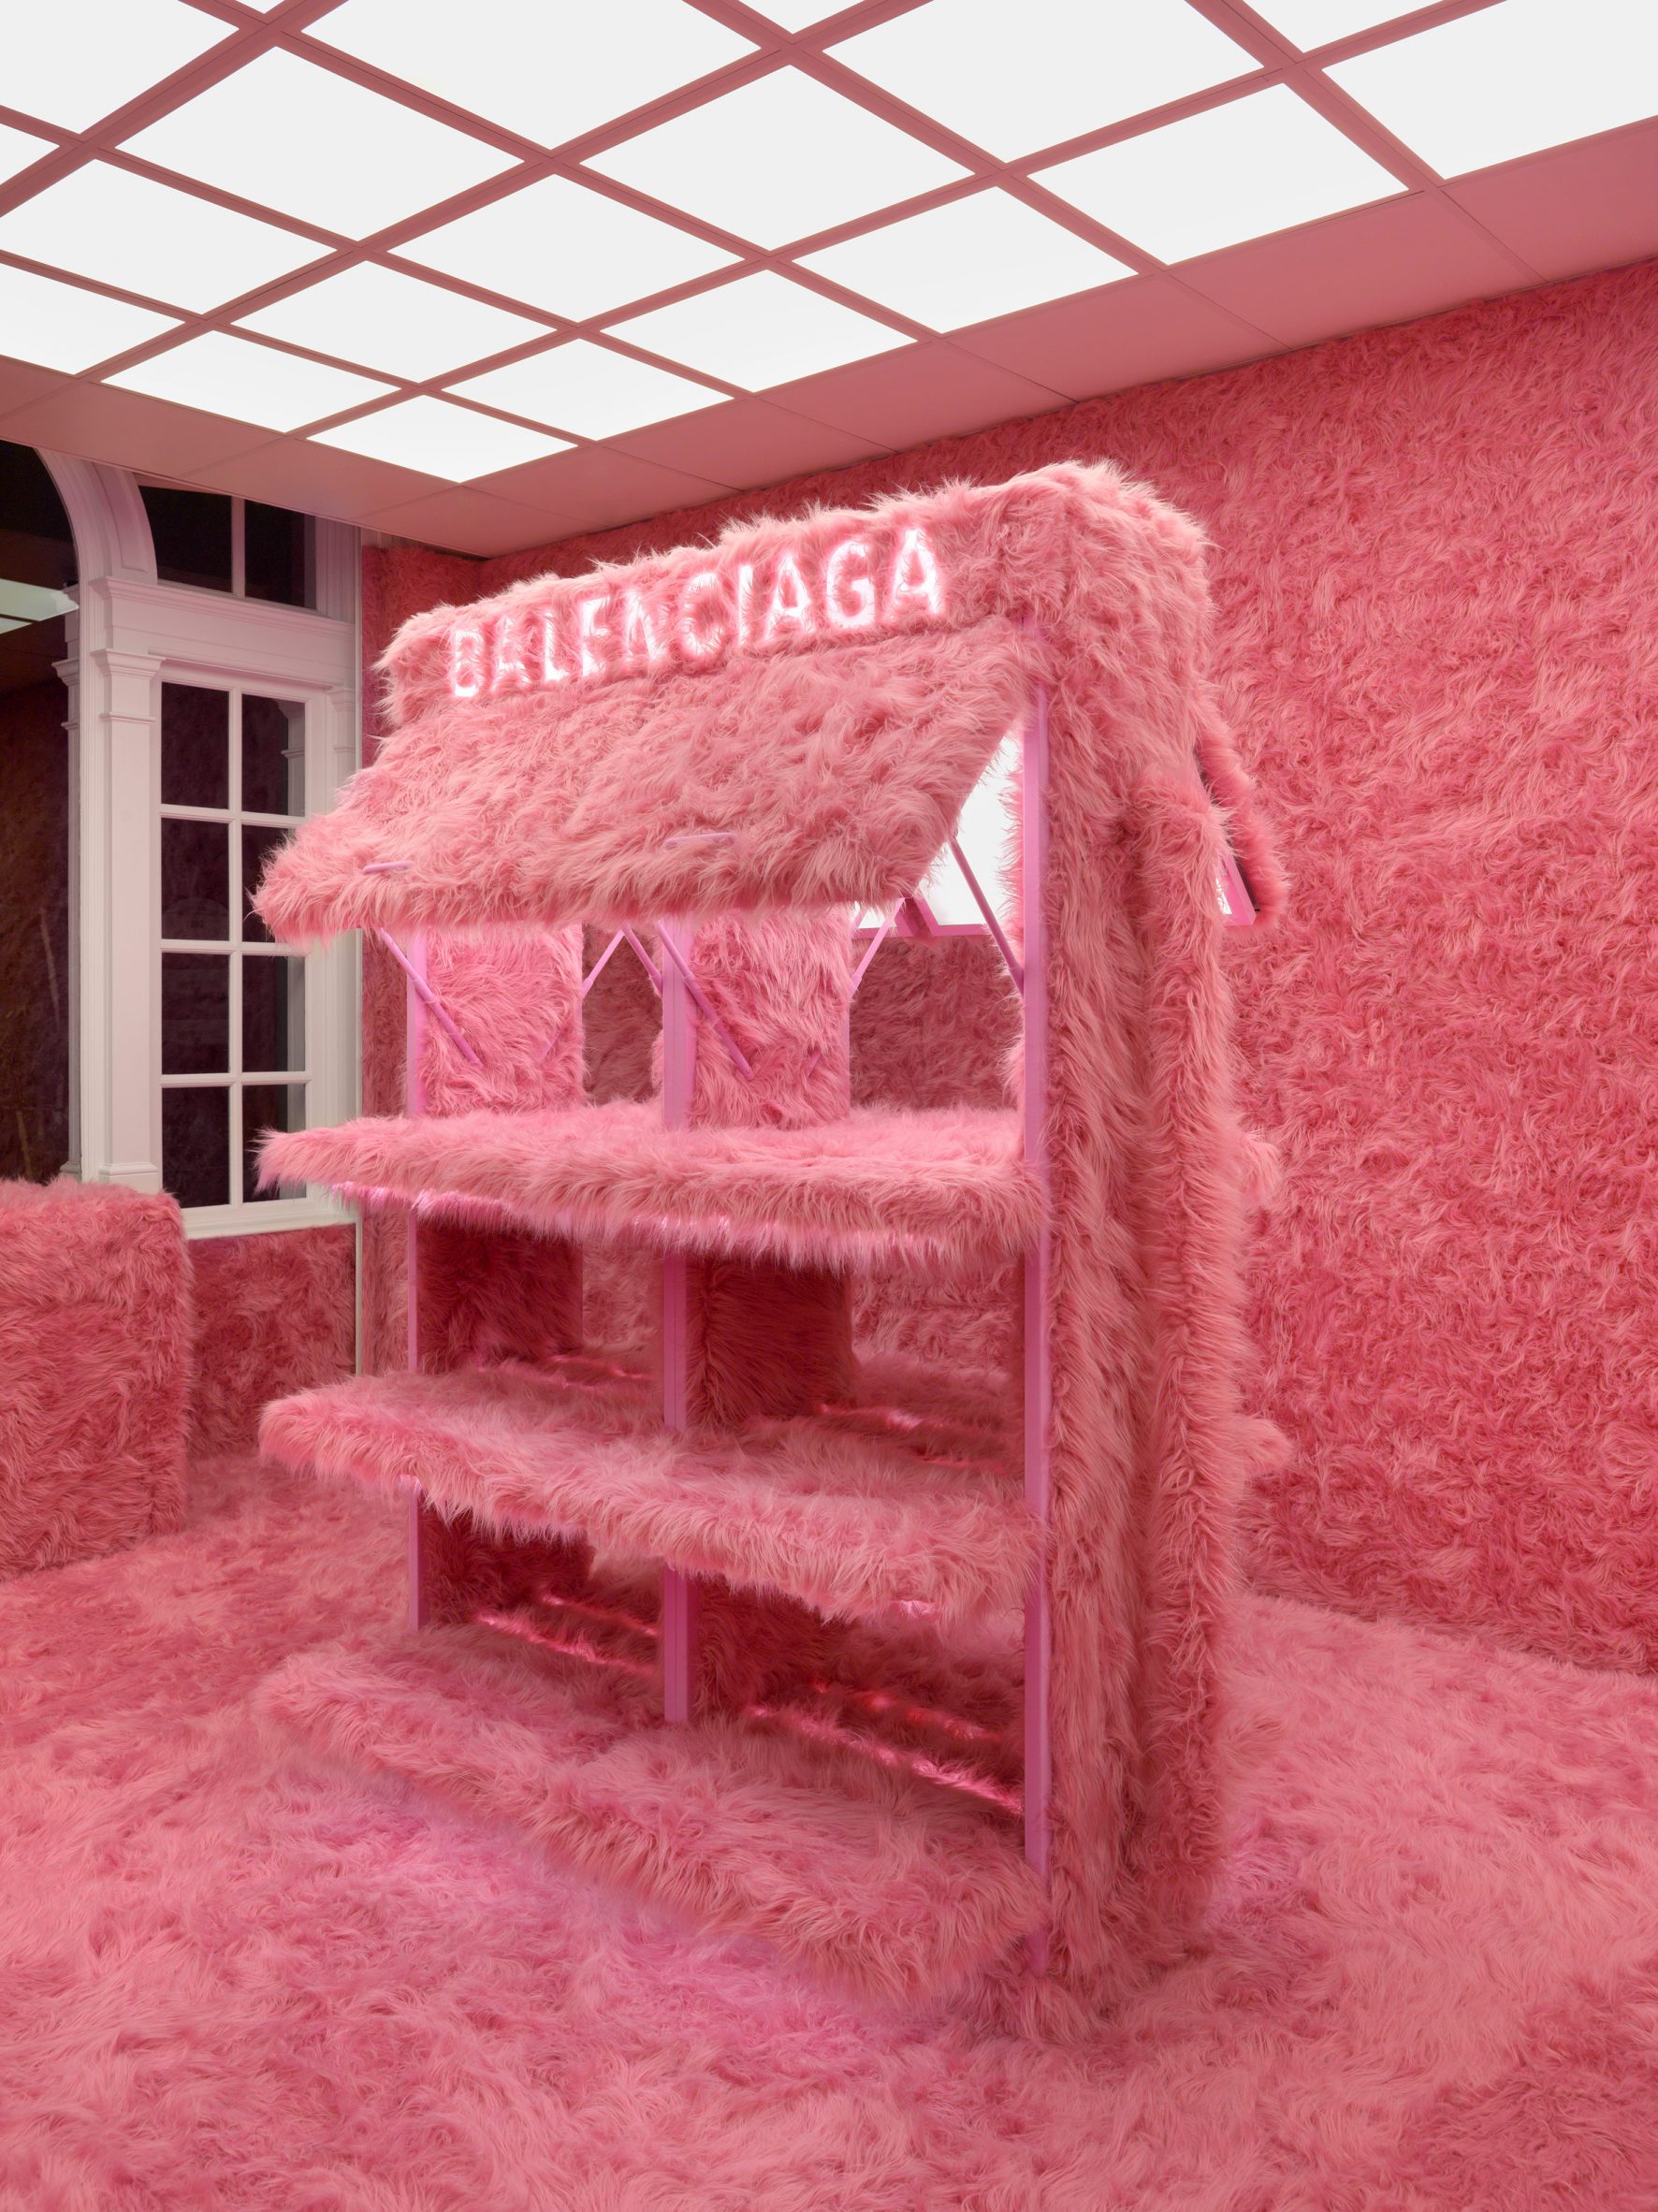 Balenciaga wraps store in pink fur to its Le